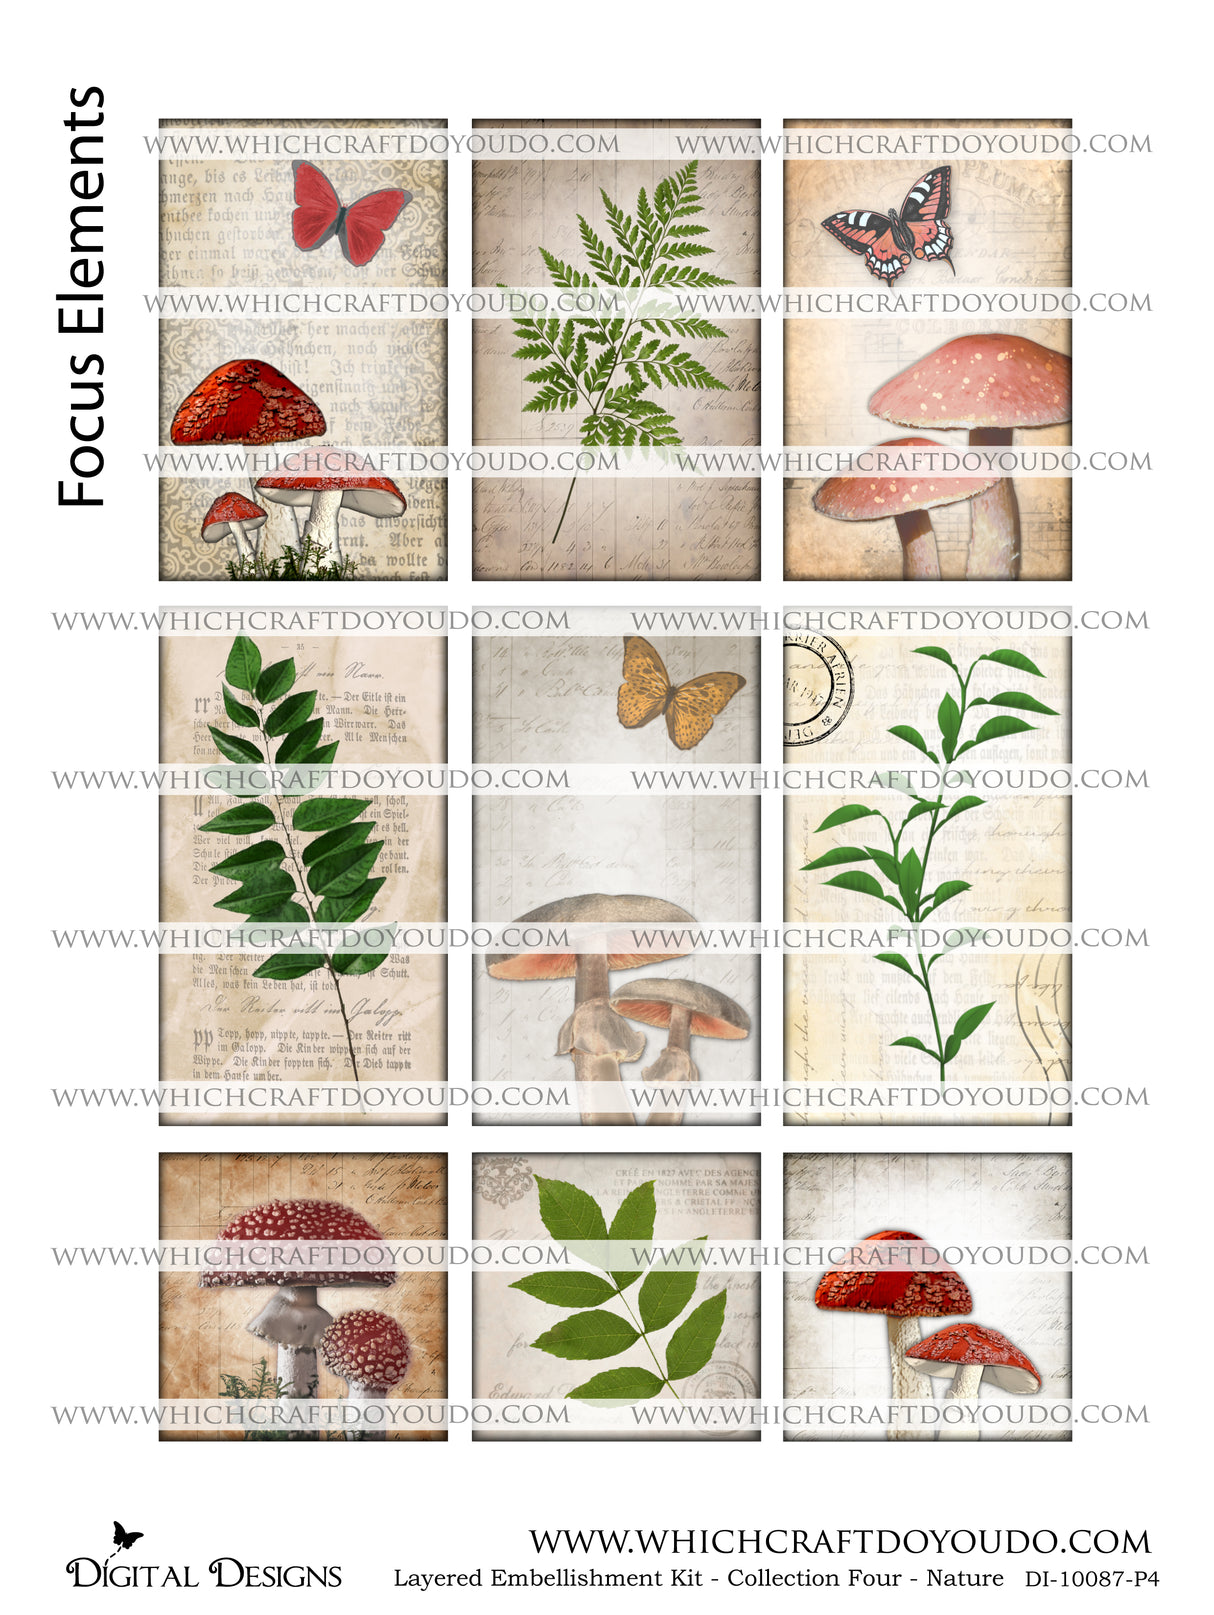 Layered Embellishment Kit - Collection Four - Nature - DI-10087 - Digital Download